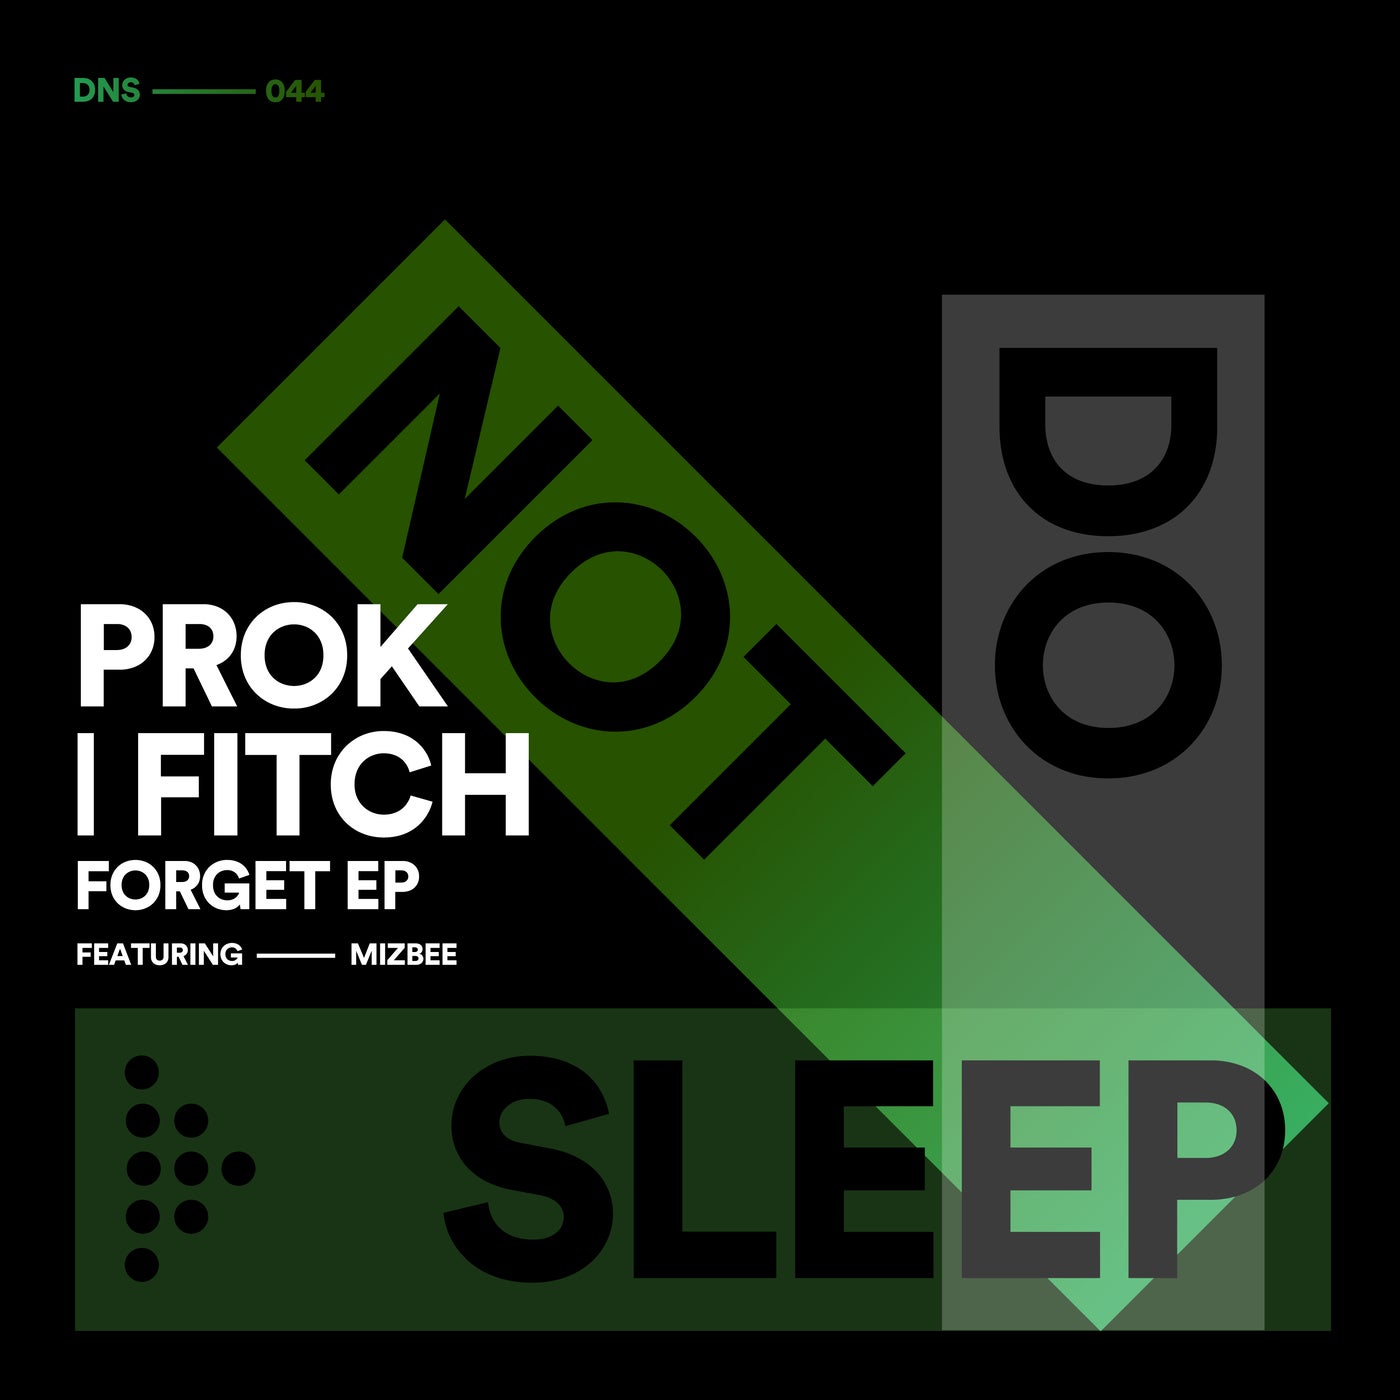 Prok & Fitch, Mizbee – Forget EP [DNS044]